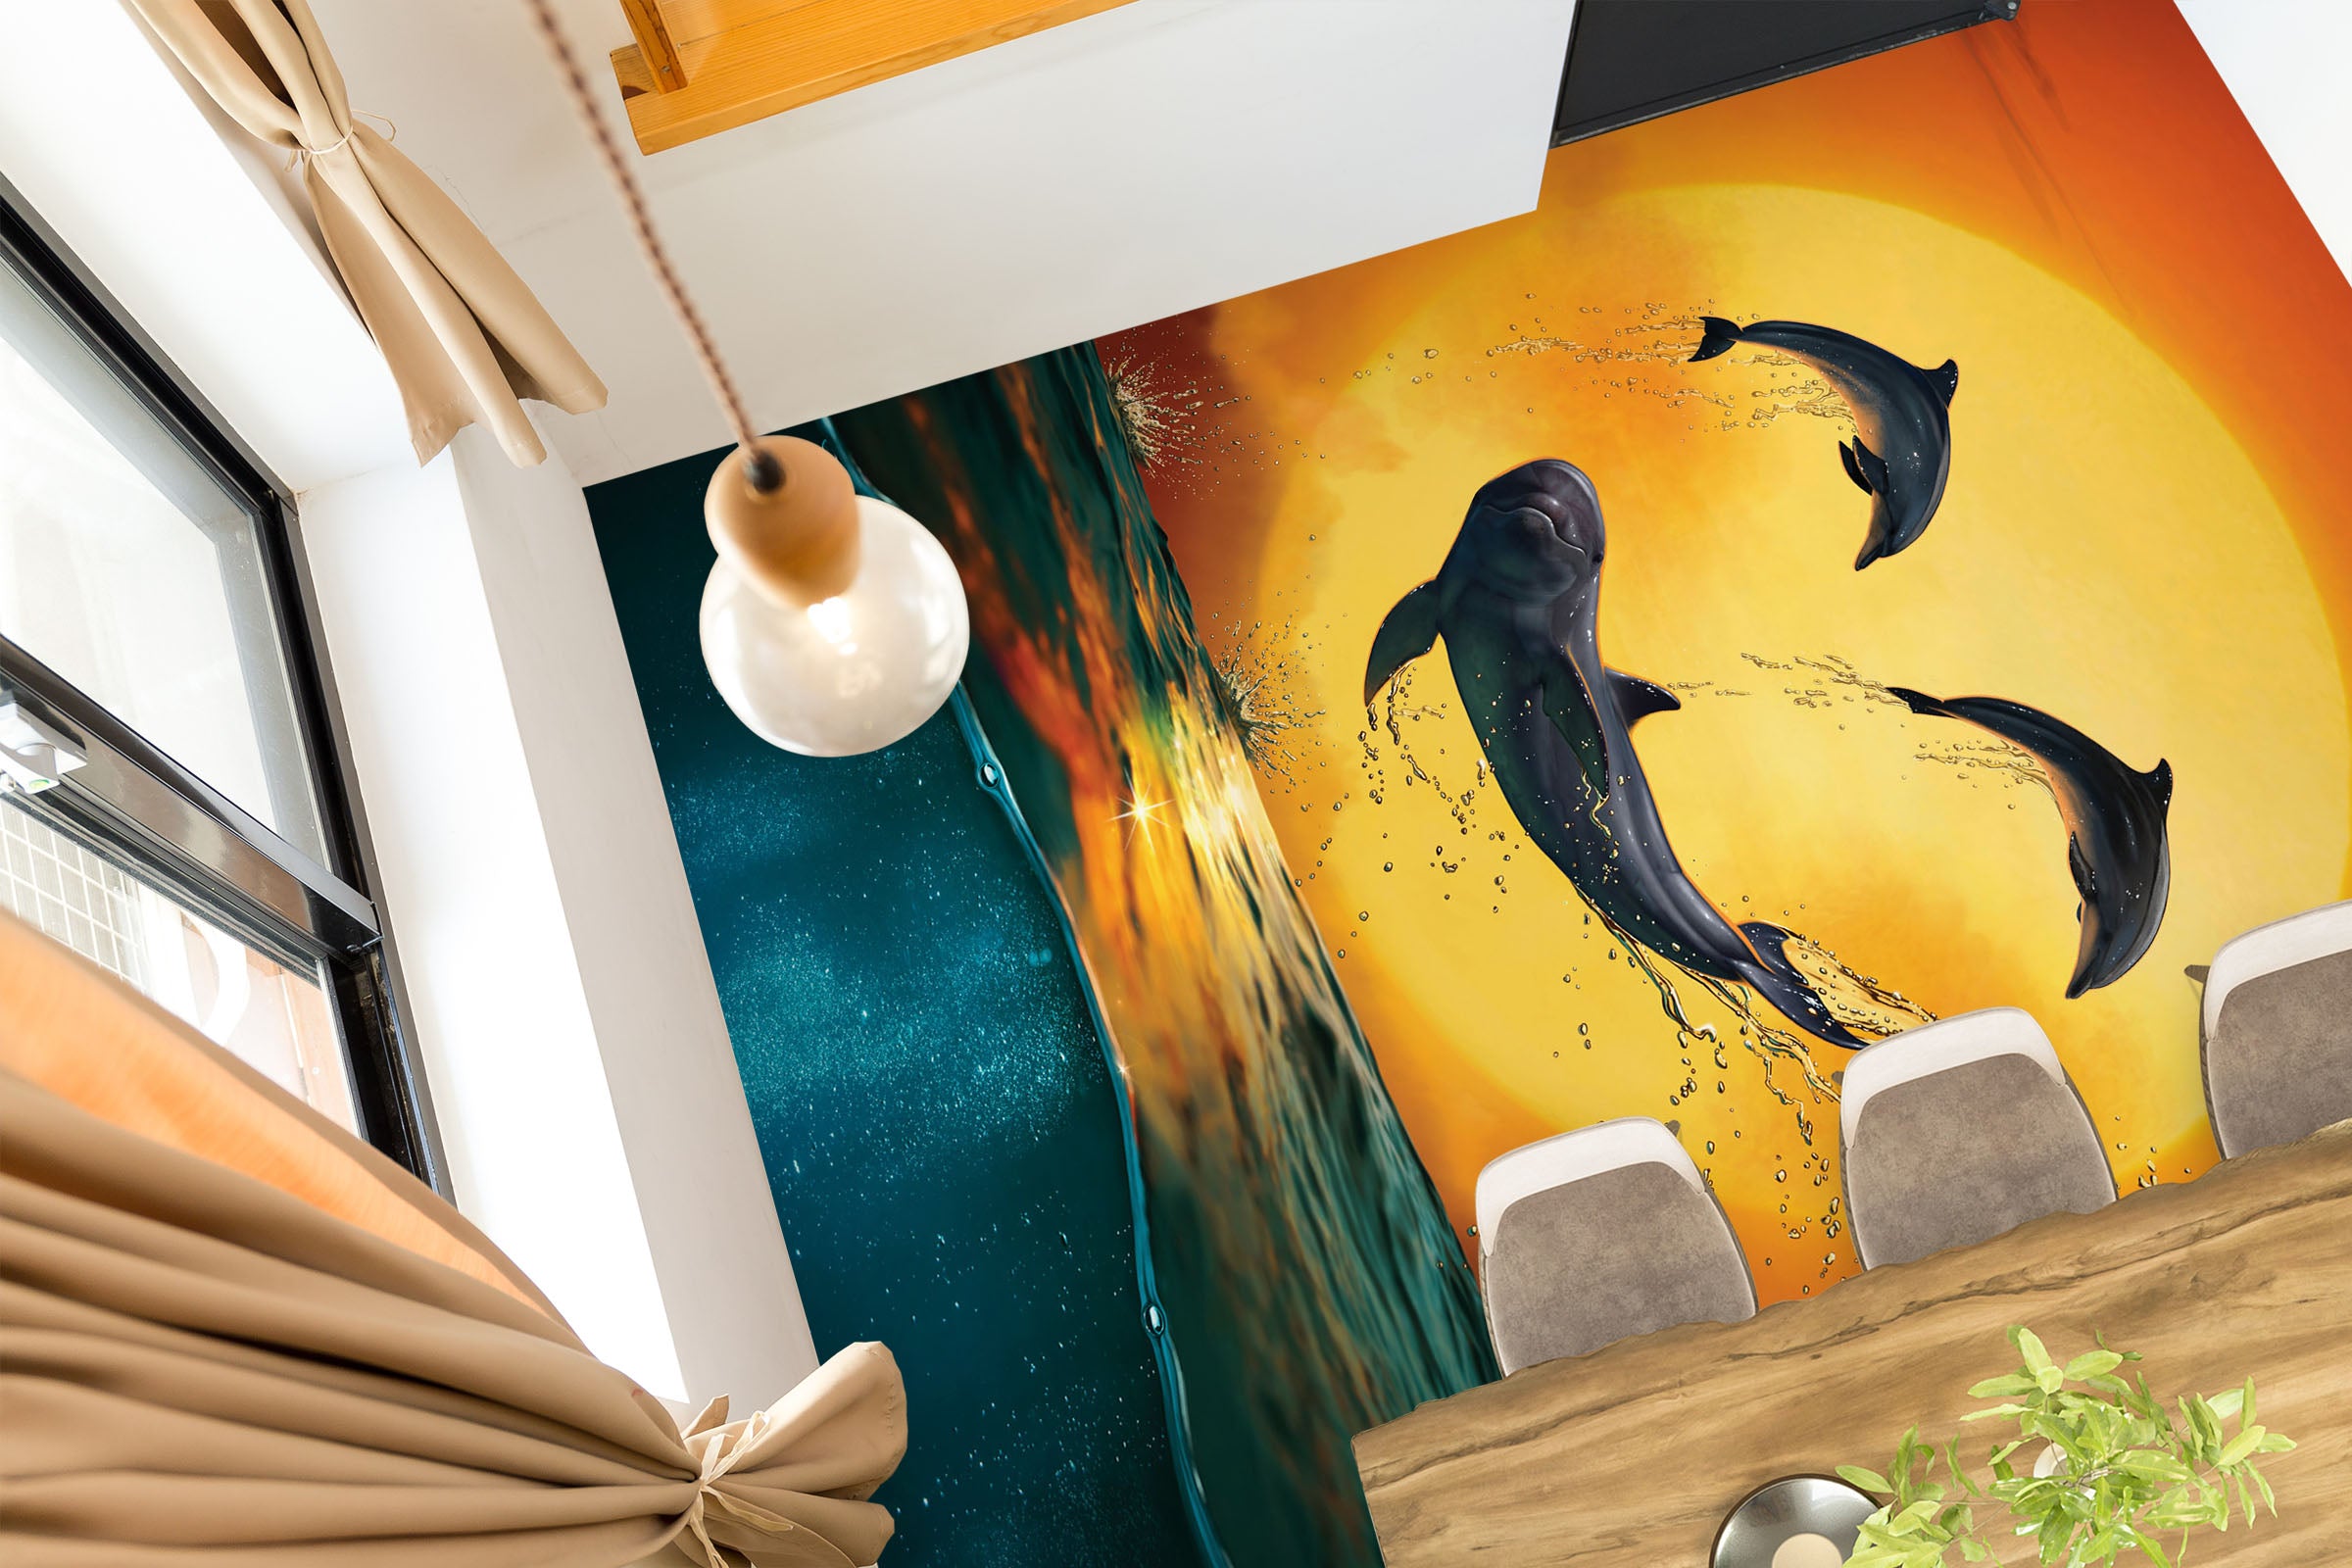 3D Dolphin 98178 Vincent Floor Mural  Wallpaper Murals Self-Adhesive Removable Print Epoxy